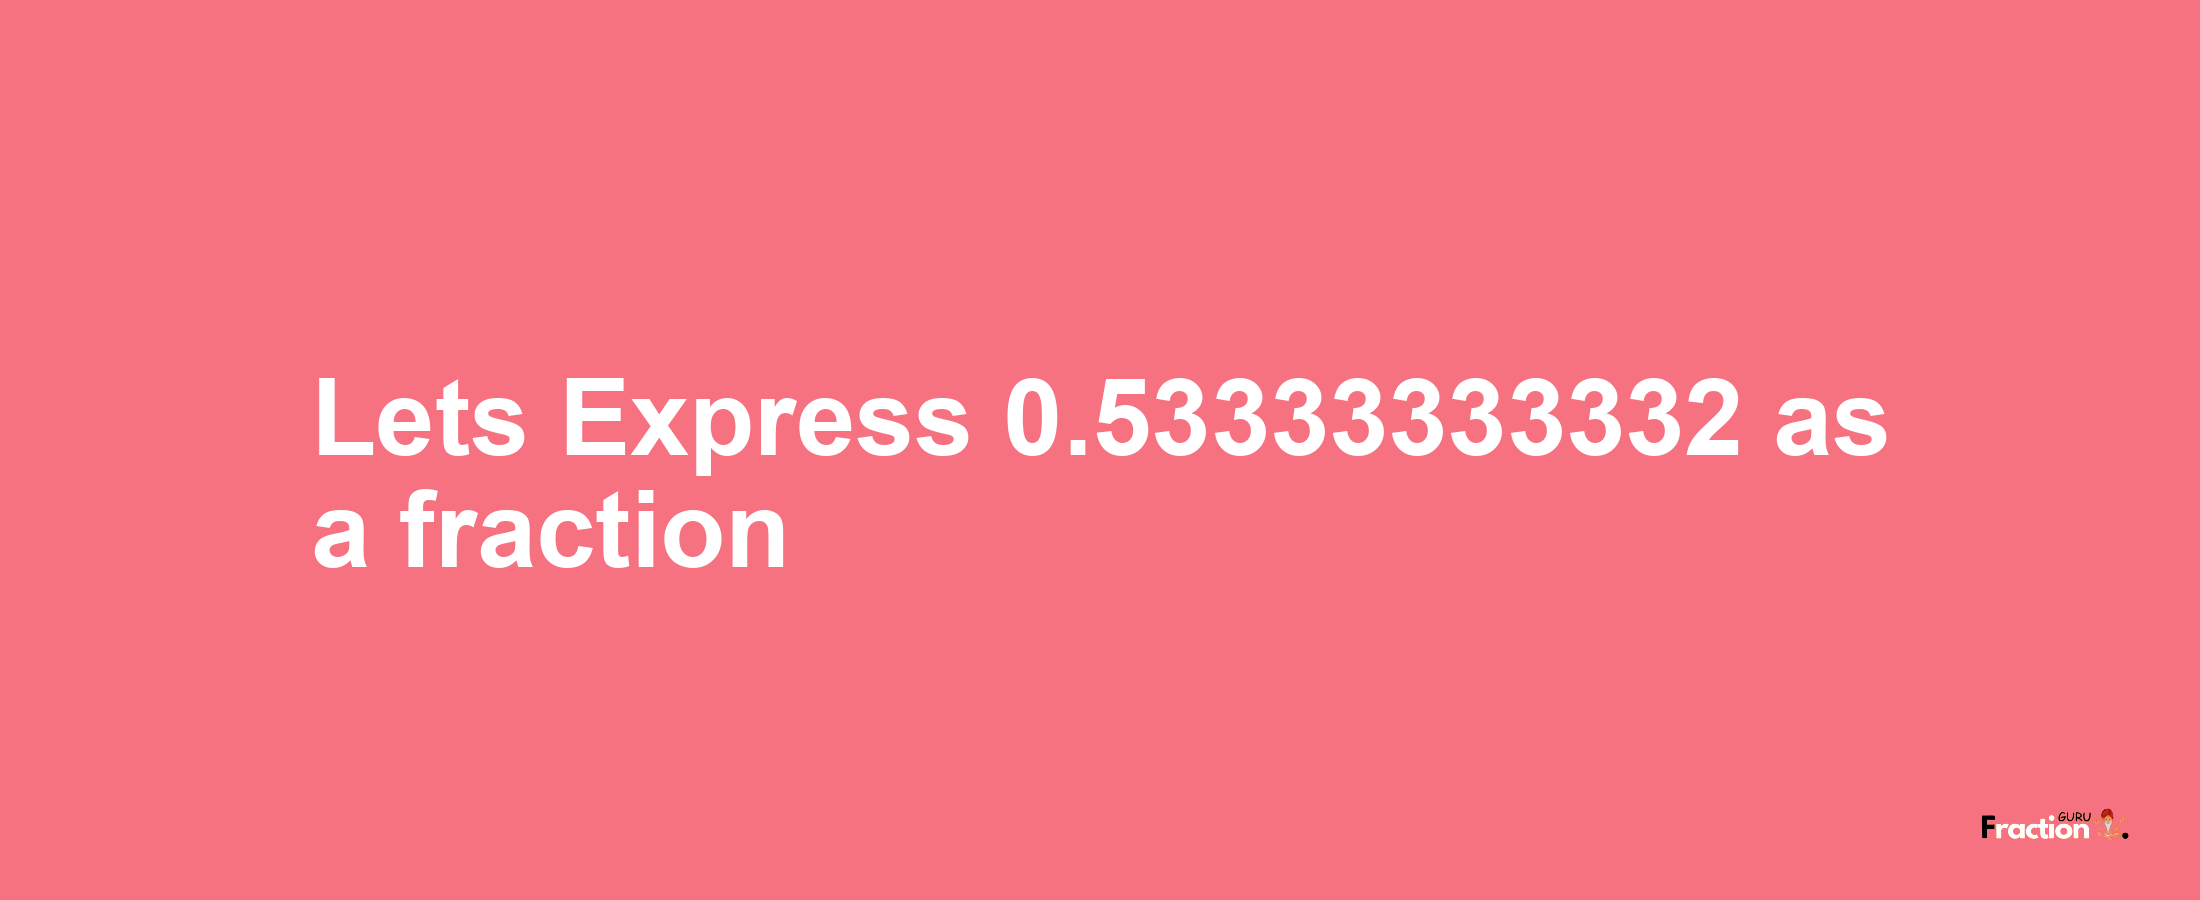 Lets Express 0.53333333332 as afraction